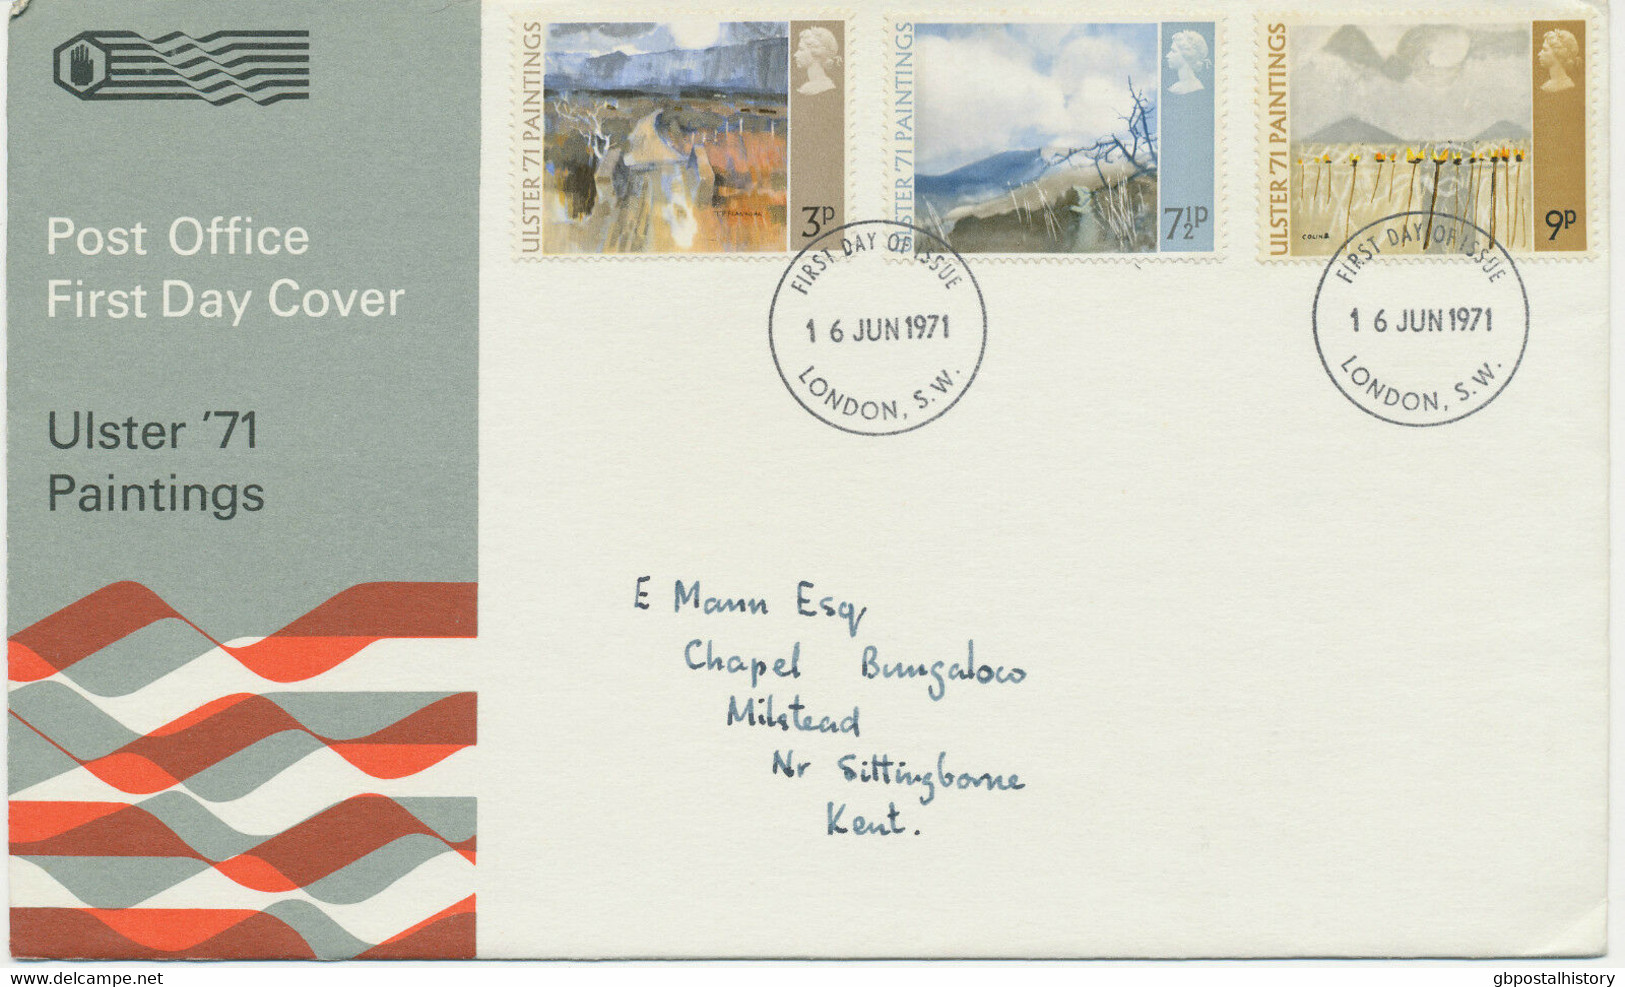 GB 1971, Ulster Paintings On Very Fine FDC With FDI-CDS "LONDON, S.W." - 1971-1980 Decimale  Uitgaven